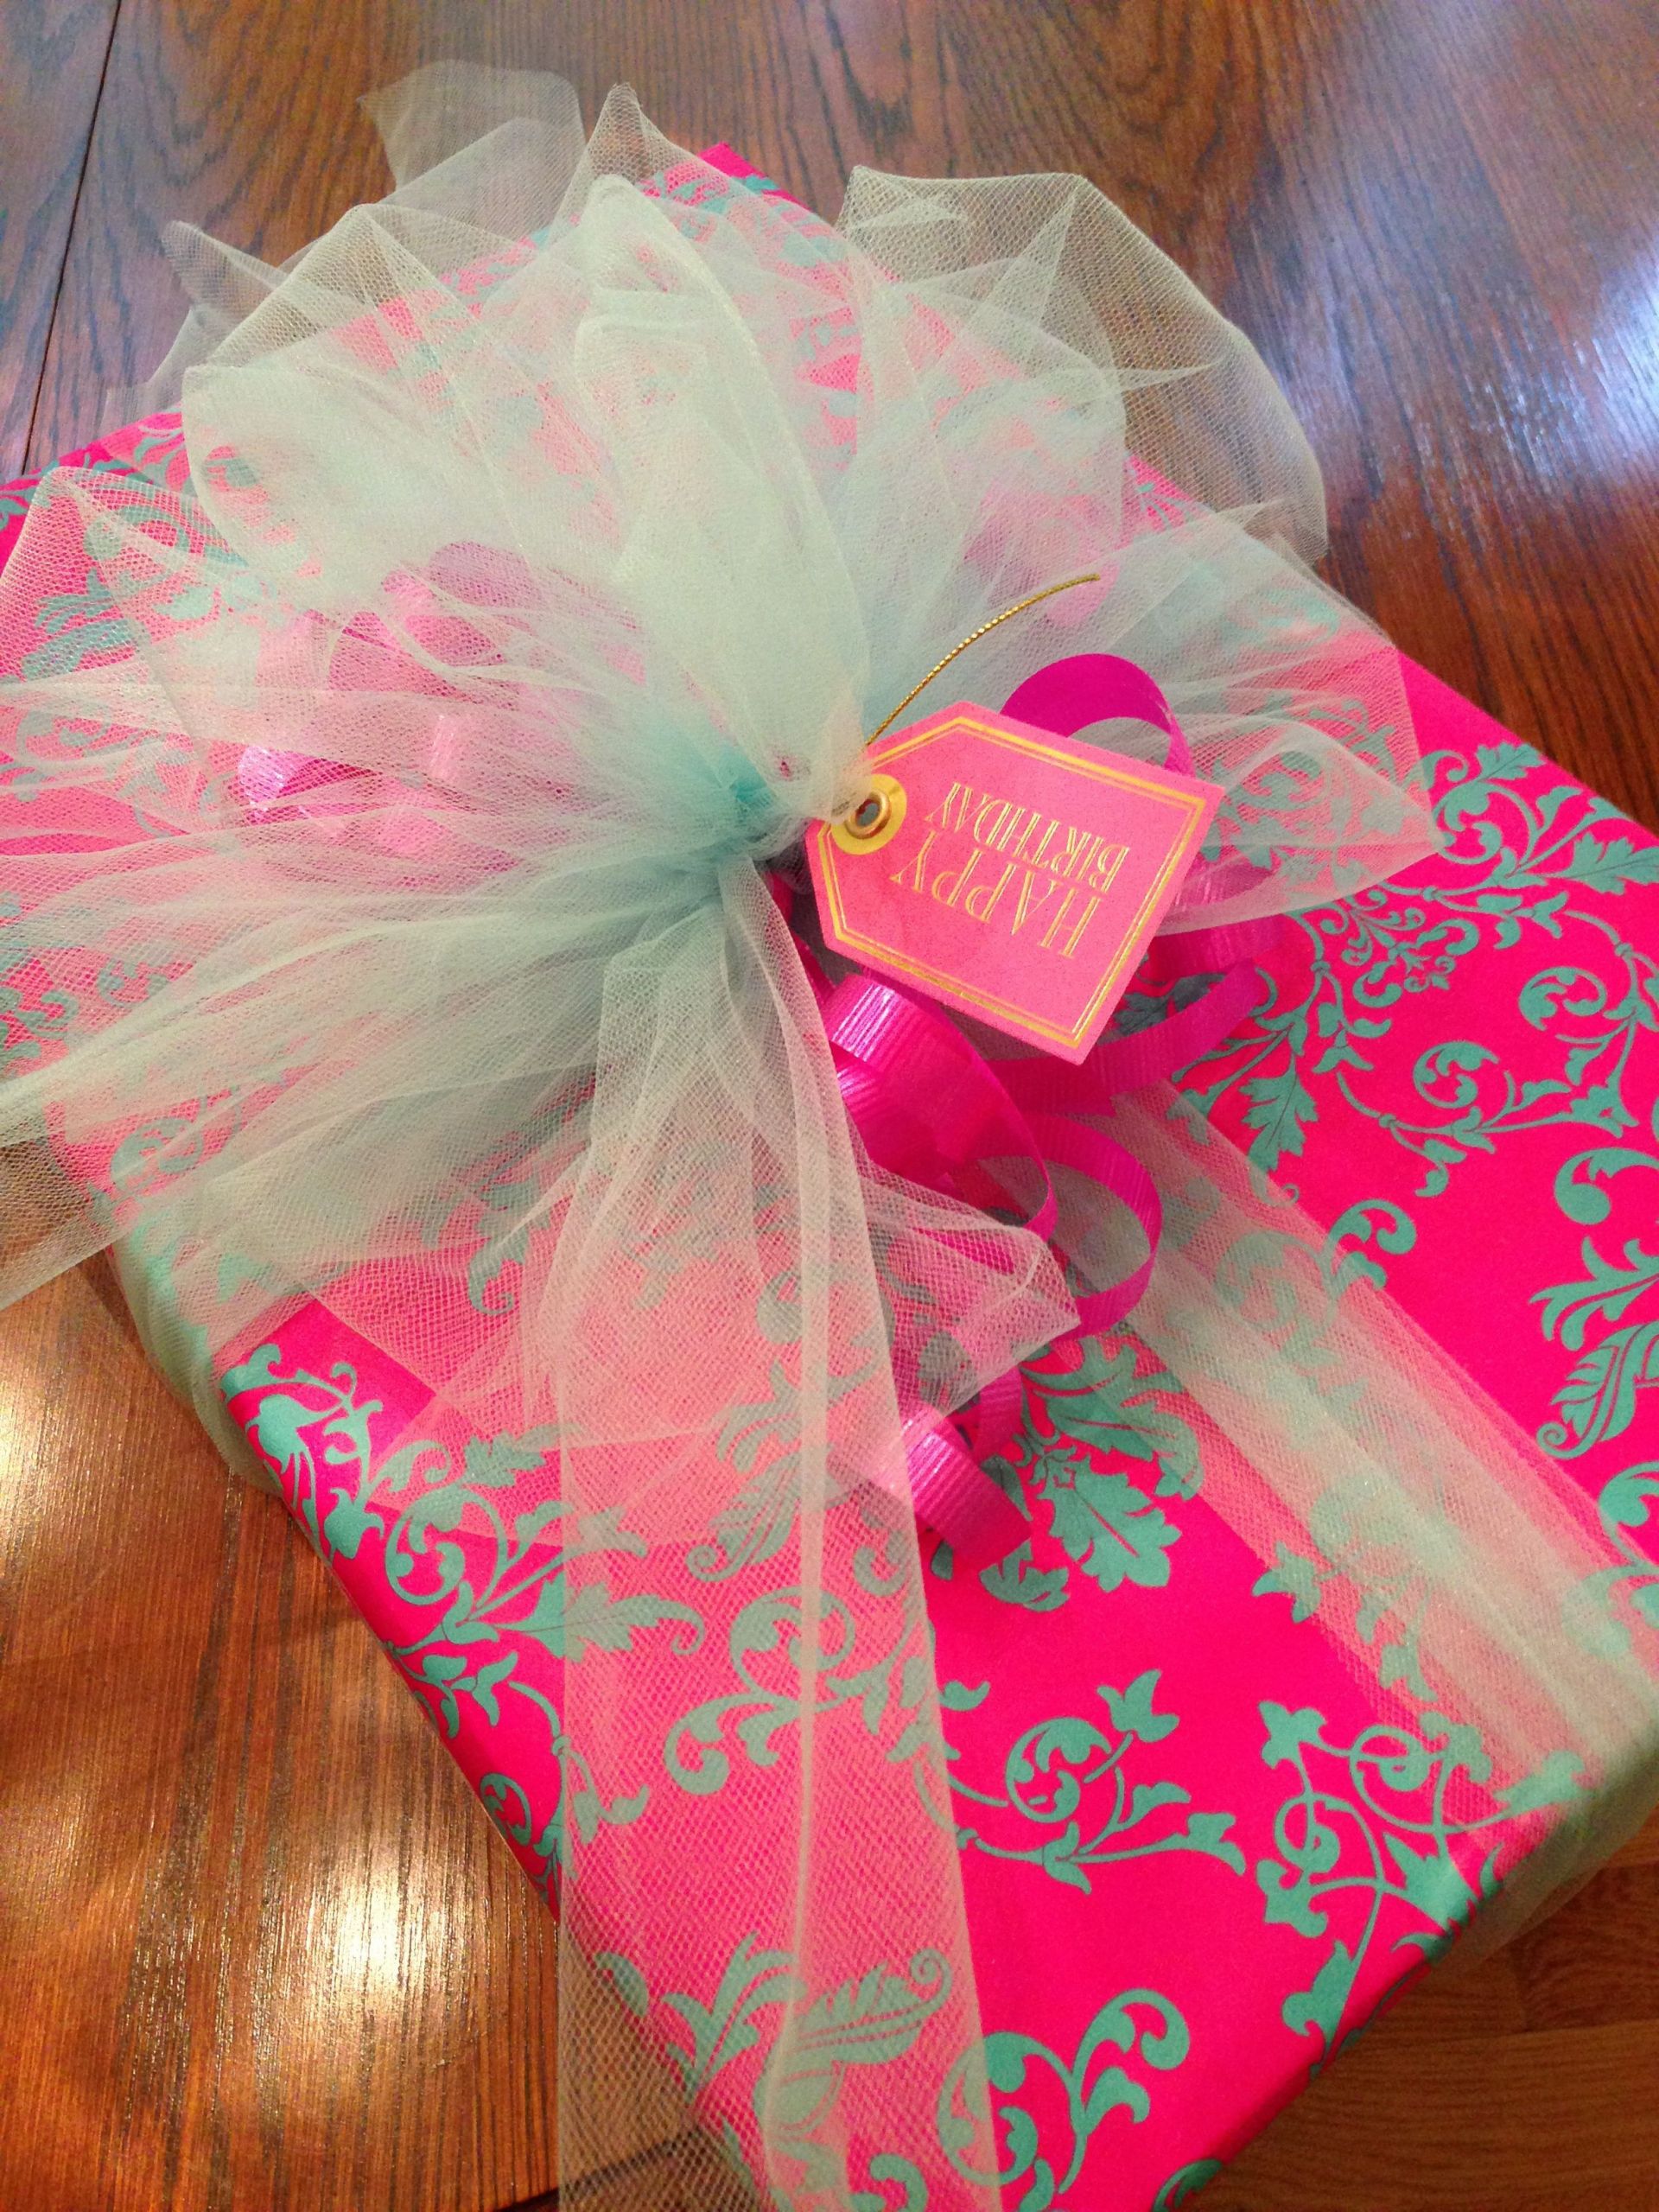 Baby Shower Gift Wrapping Ideas Pinterest
 This is the most beautiful thing I ve ever seen My God